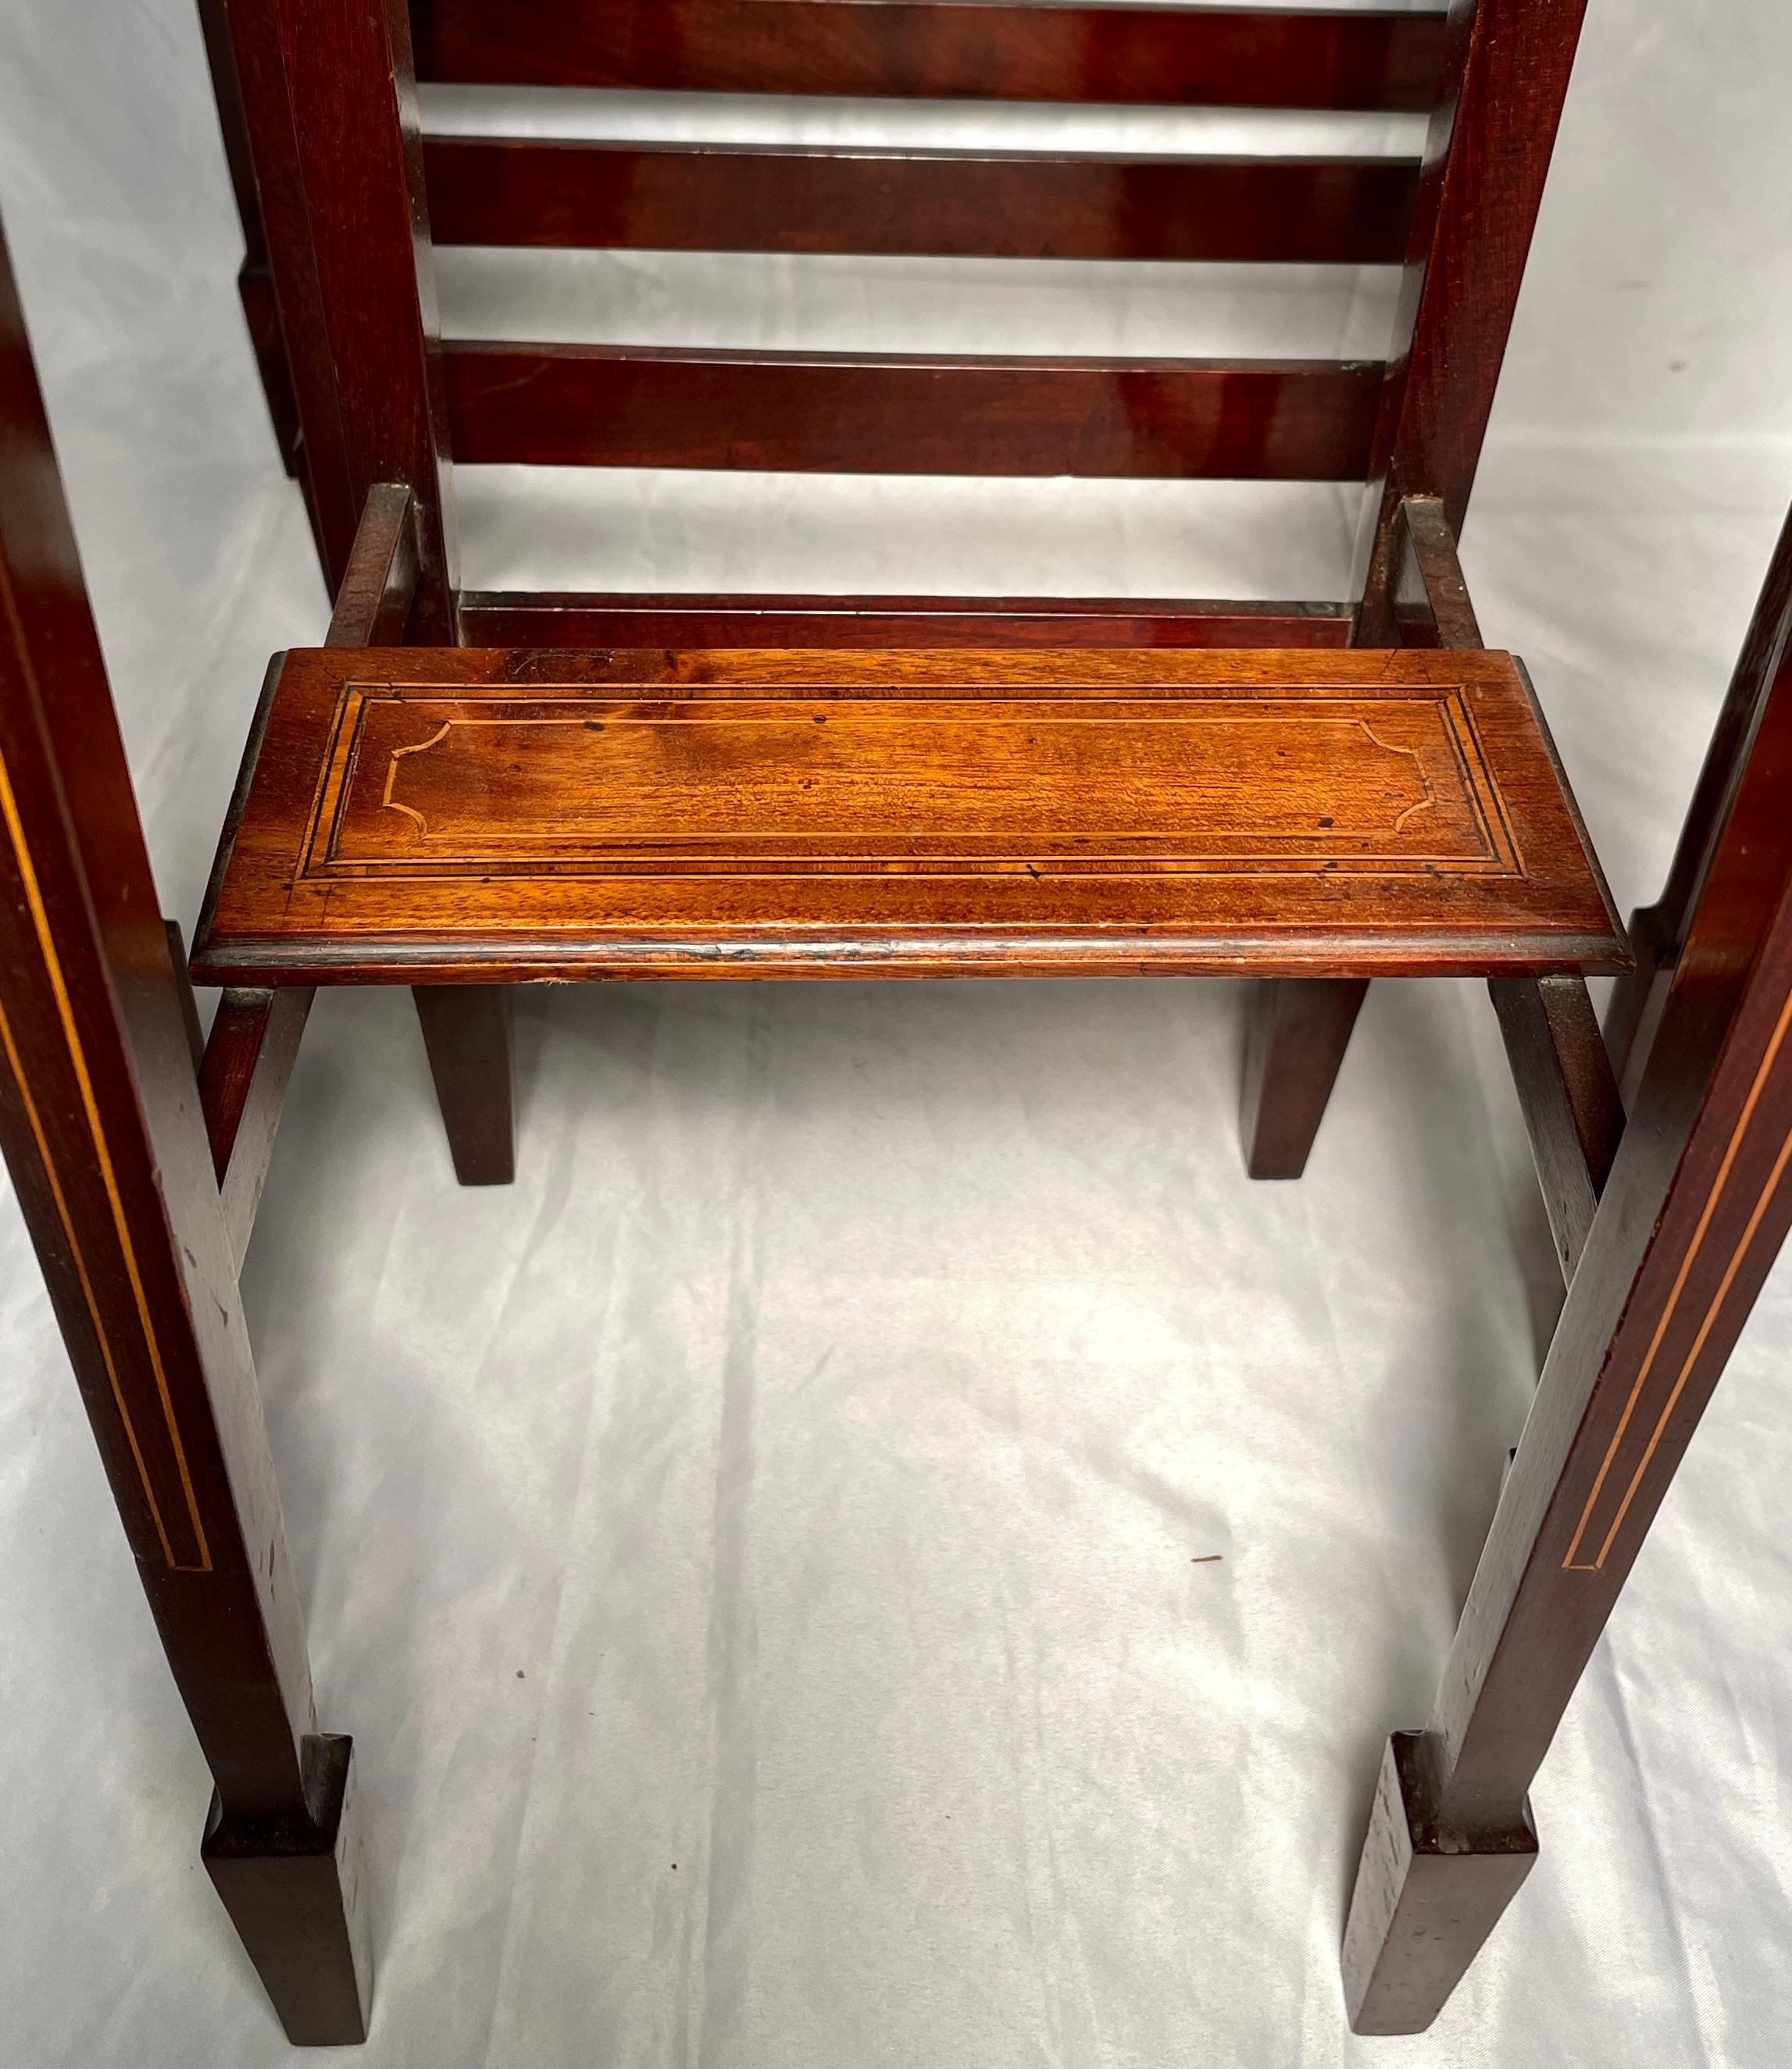 Set of 4 Antique English Mahogany Serving Tables, Circa 1890-1900 For Sale 2